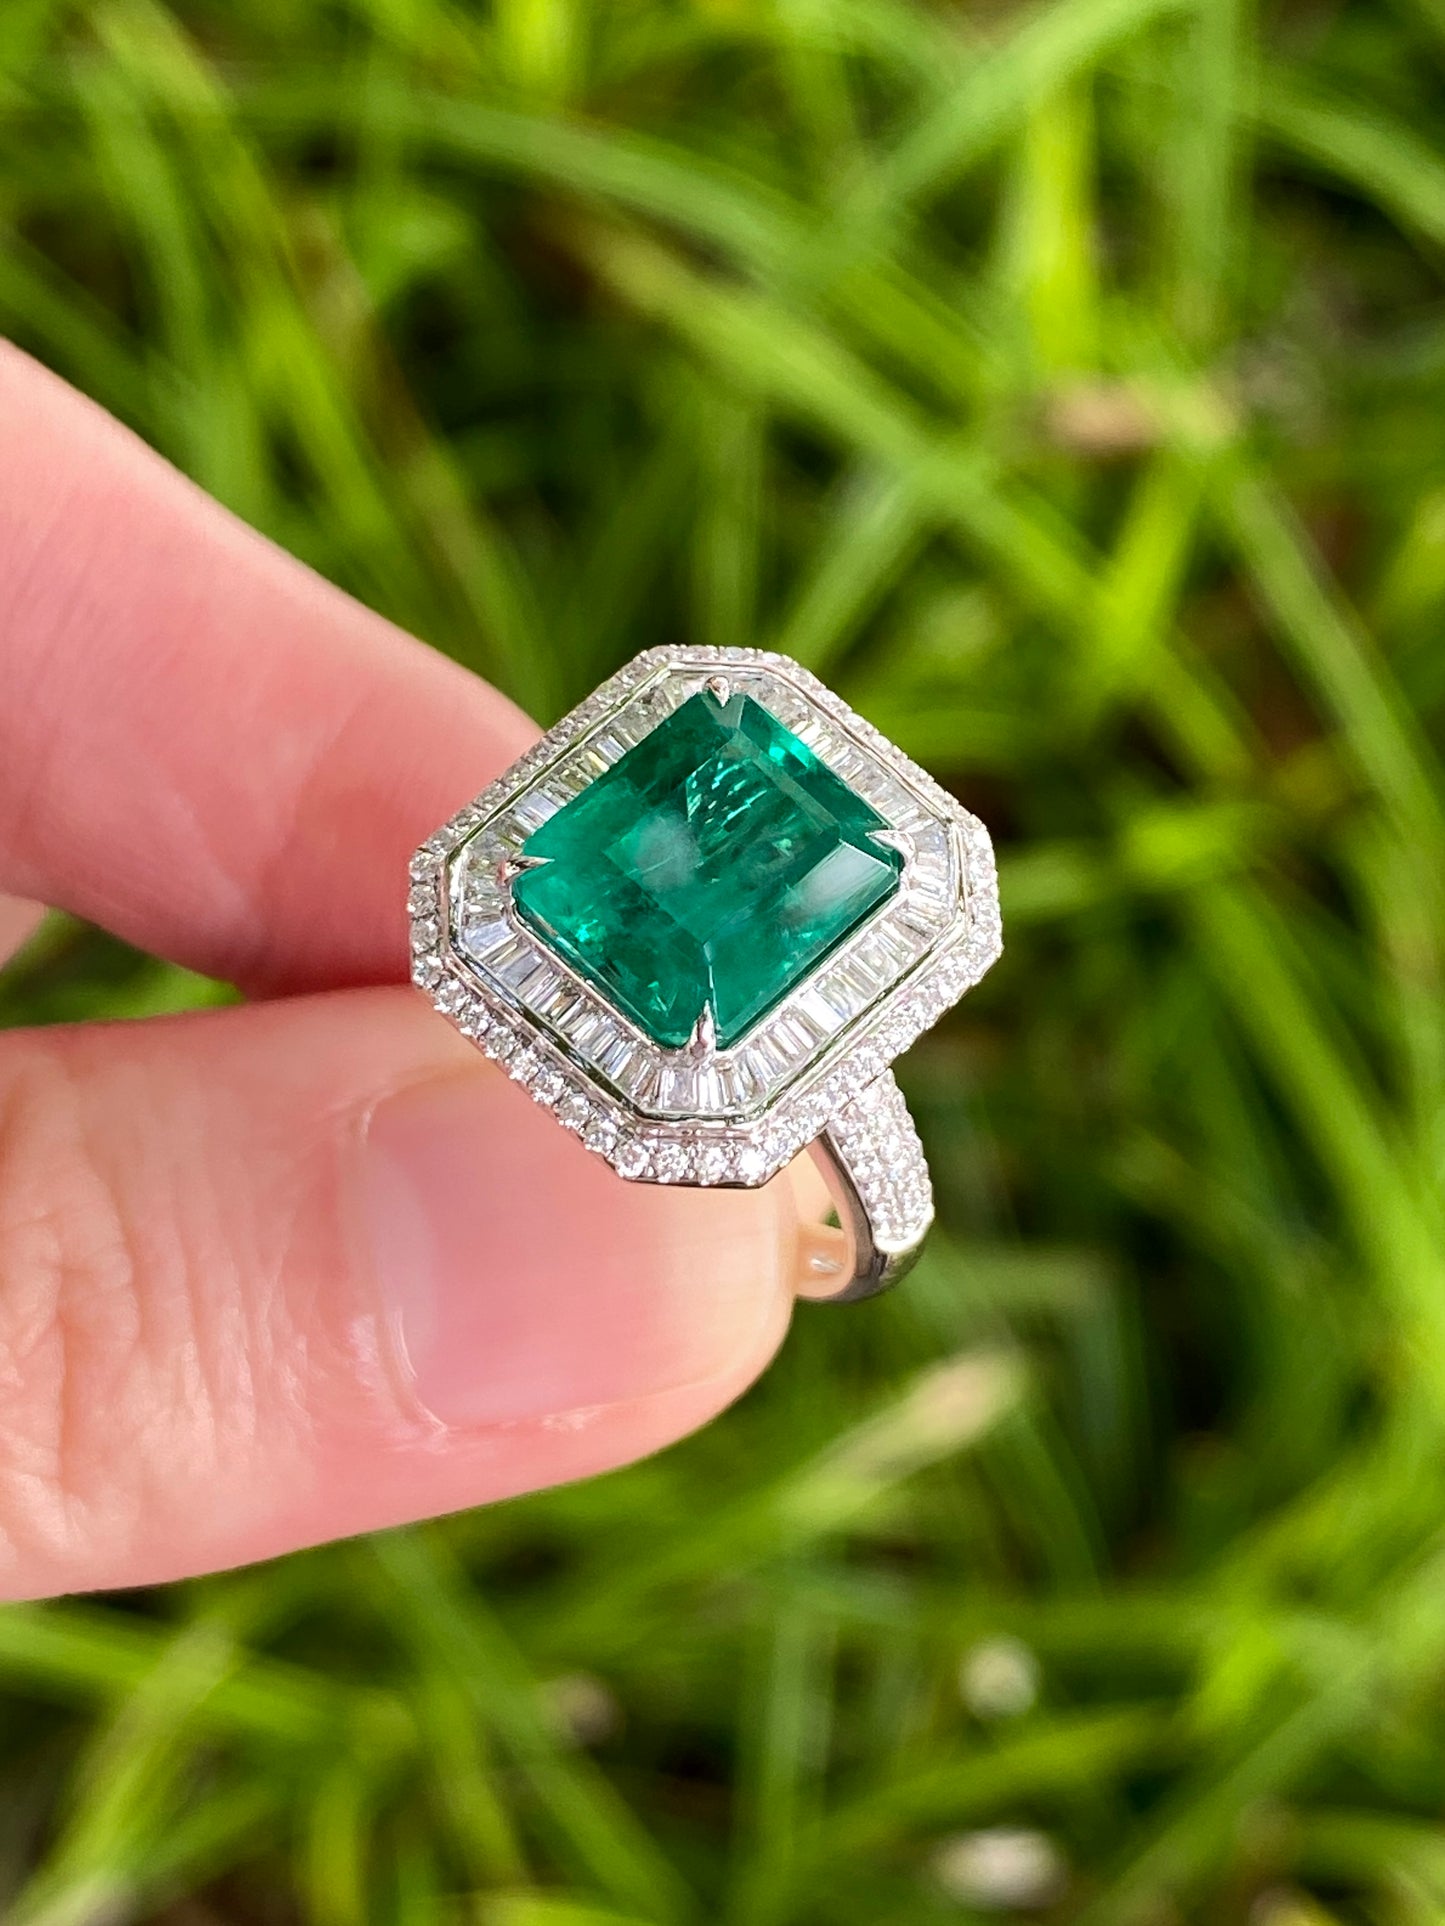 Natural Emerald 4.69ct Ring set with Natural Diamonds in 18K White Gold Singapore Gemstone Fine Jewelry